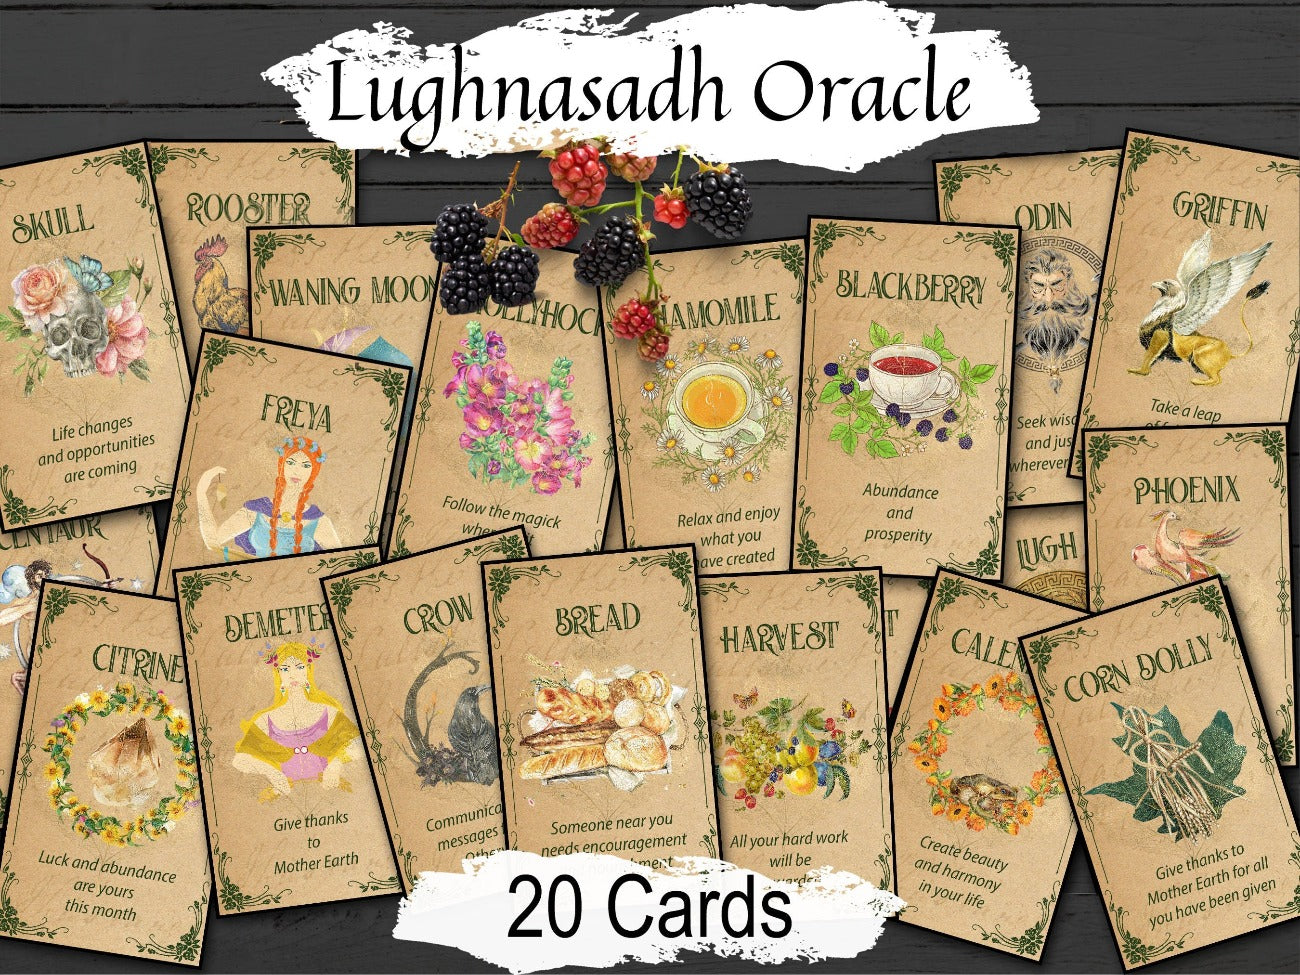 LUGHNASADH ORACLE, Wicca Witchcraft Sabbat Cards to Print at Home, Lammas Tarot Inspirational Deck, Wheel of the Year, Divination Journal - Morgana Magick Spell